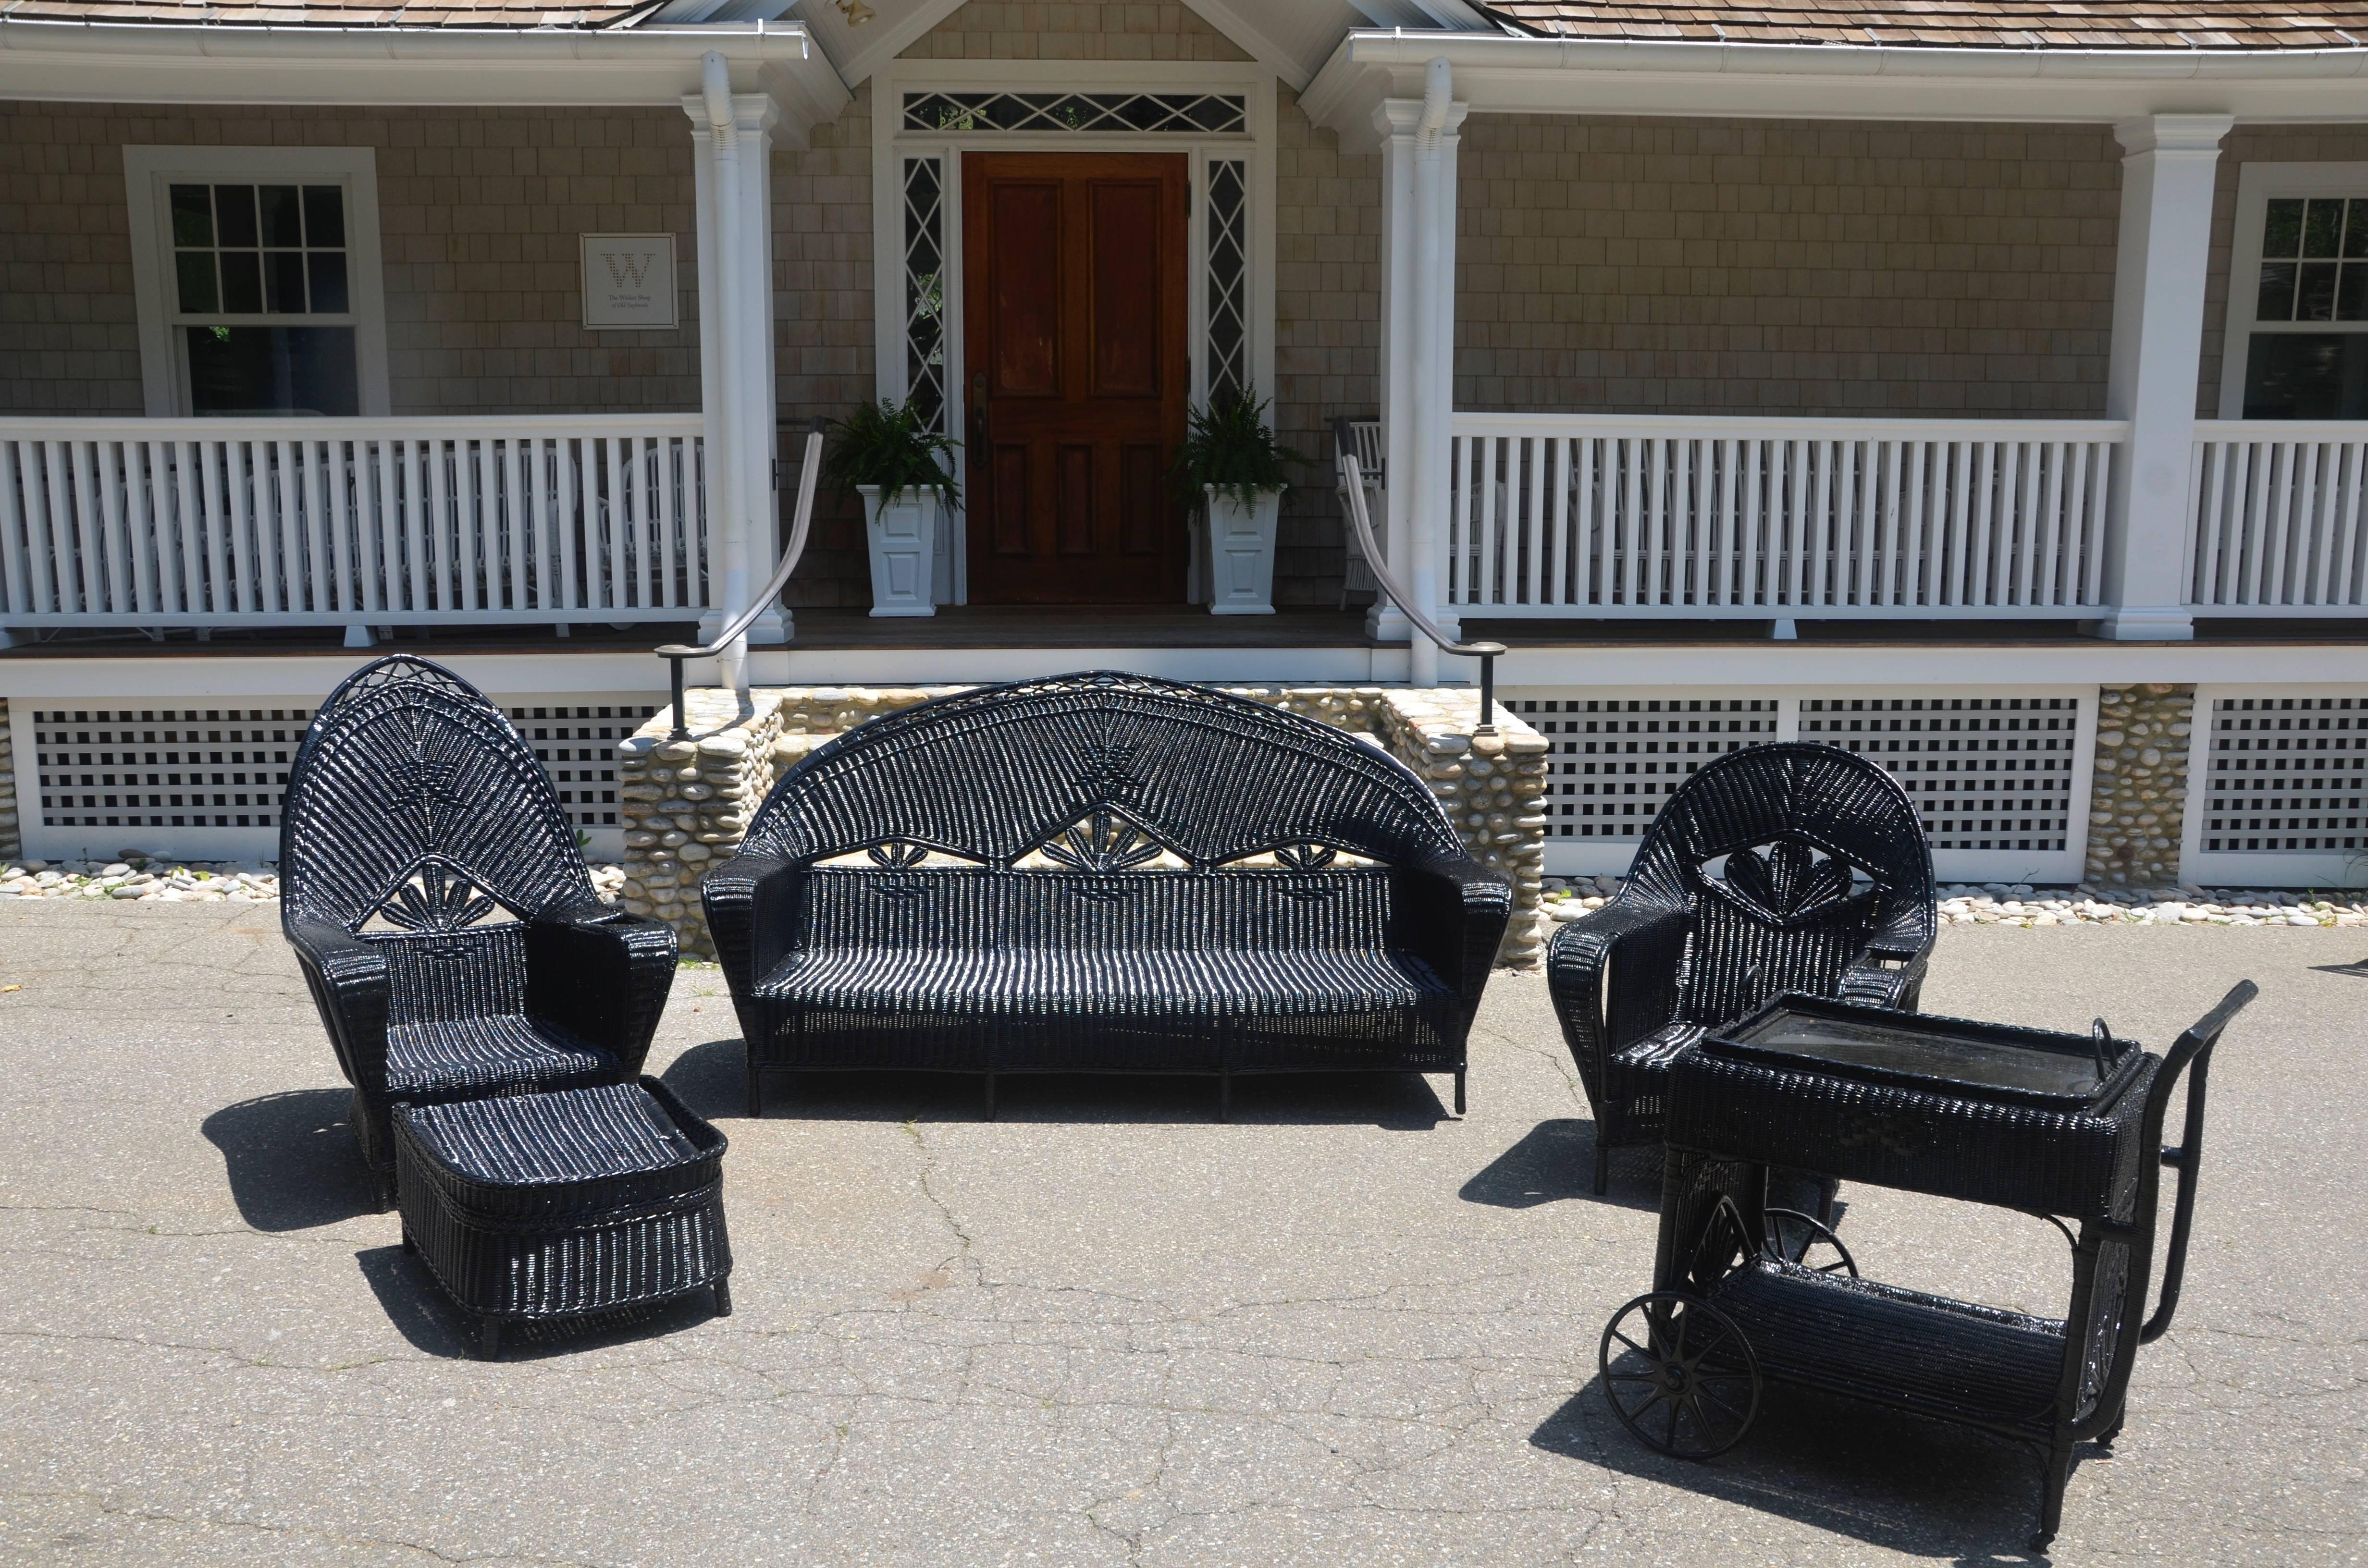 Antique wicker set woven of reed and painted black including an ottoman and teacart. Large-scale and sturdy set in hard to find design.
Measures: Sofa 42